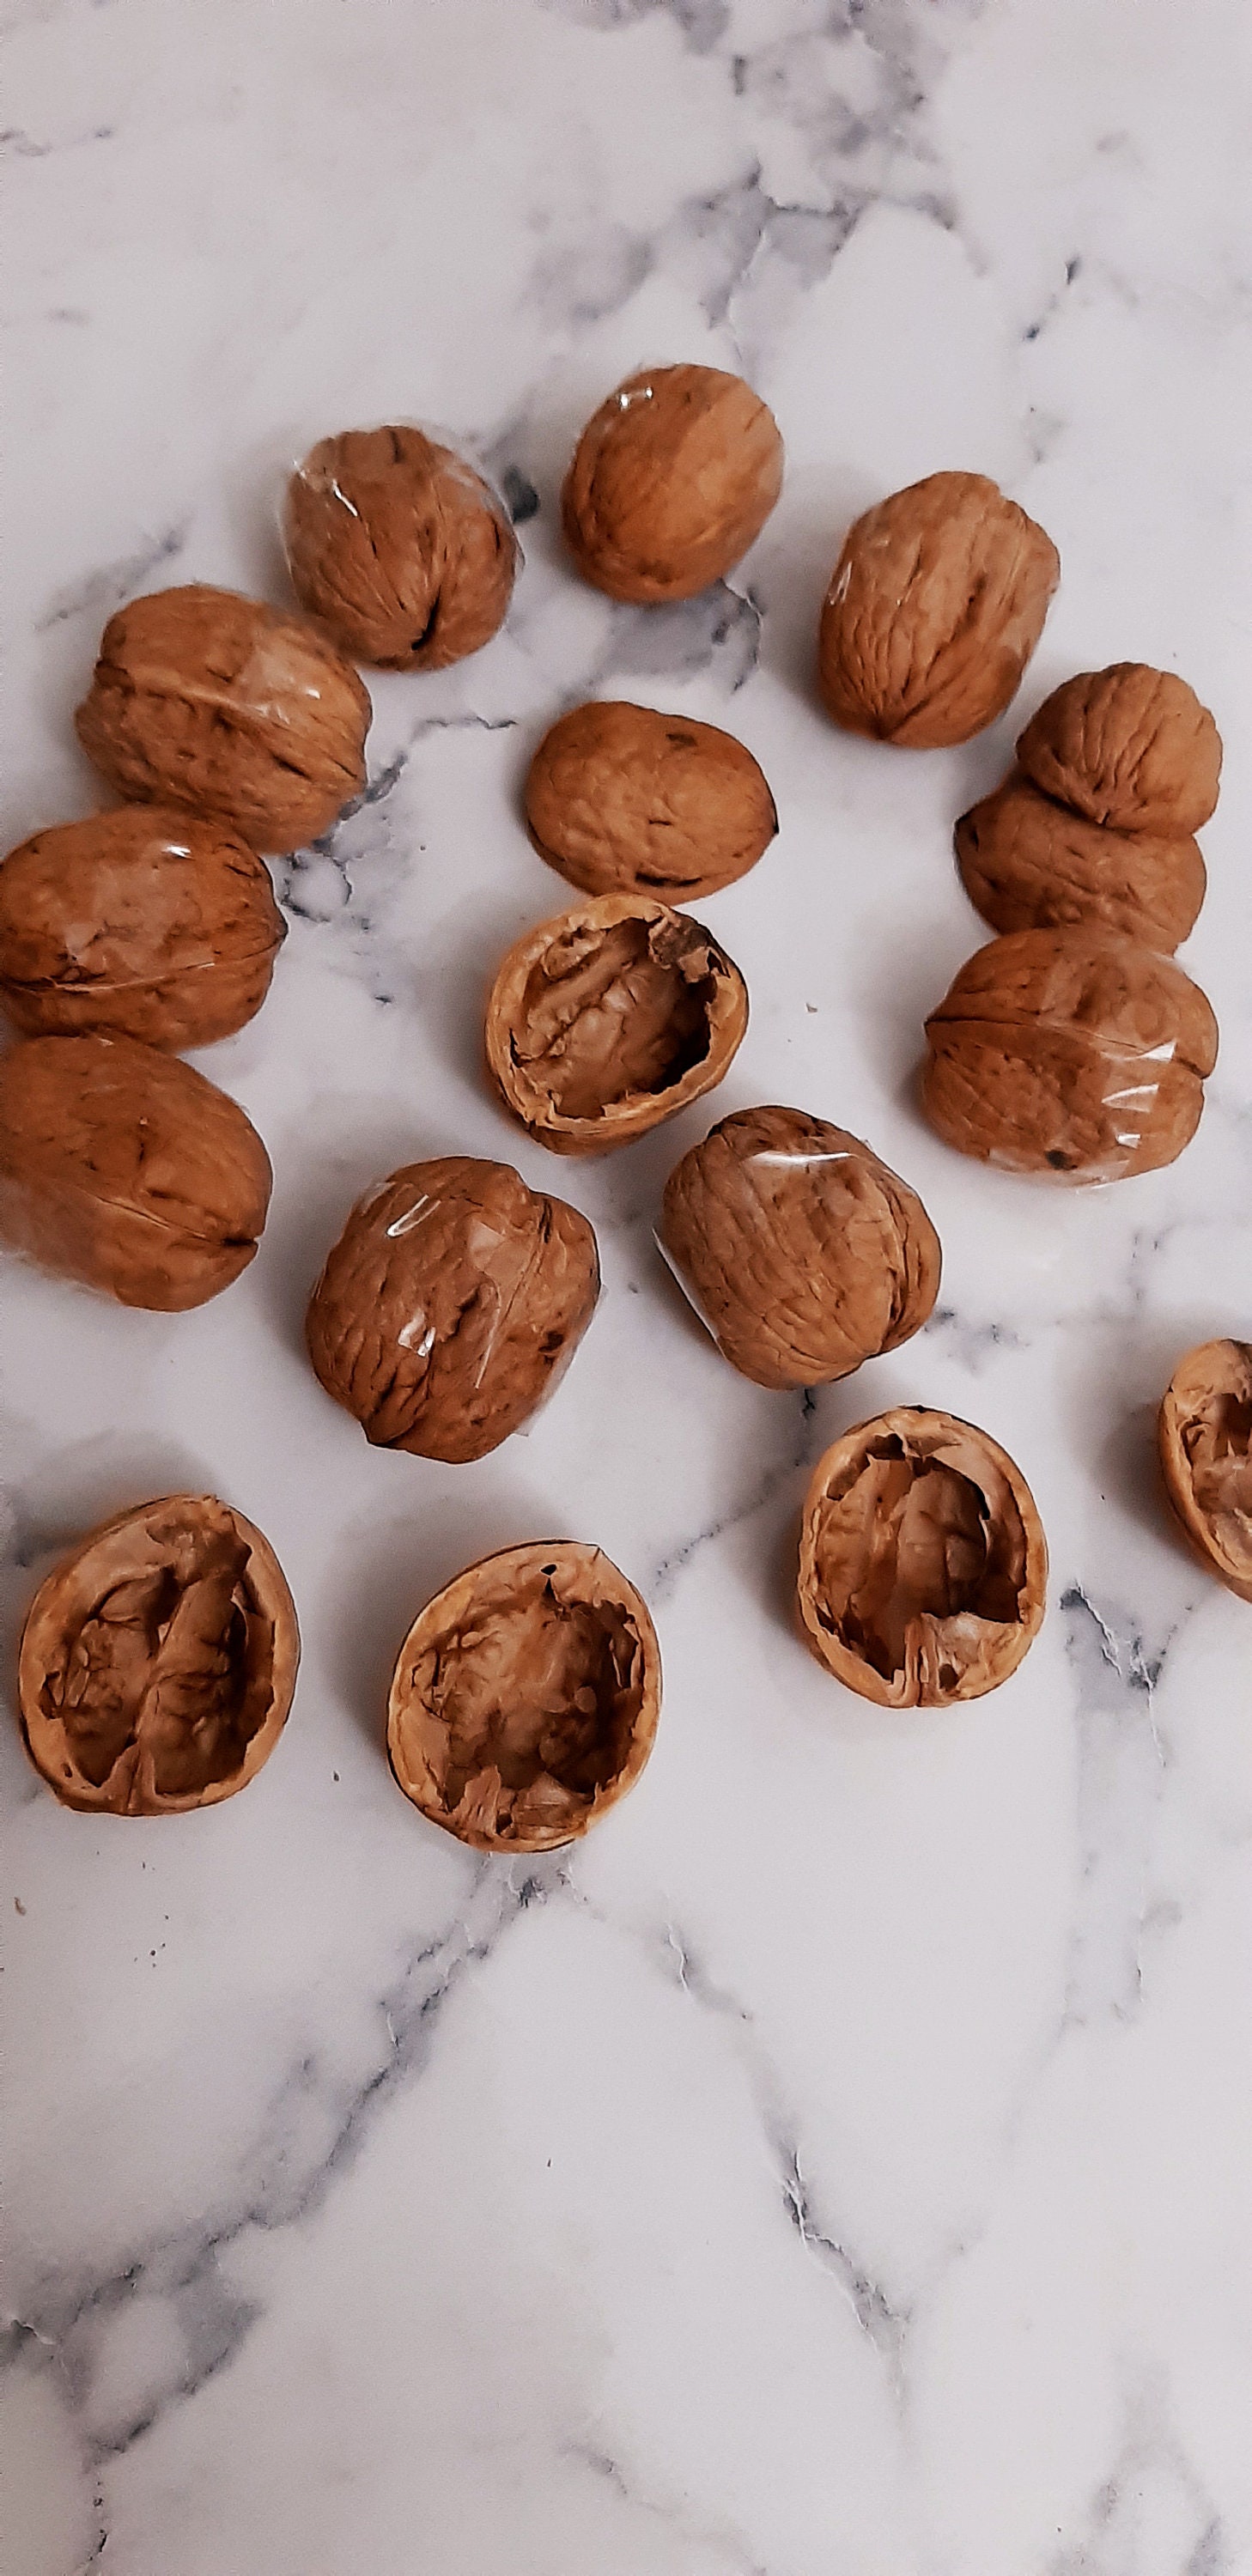 Unscented Ground Walnut Shells for pincushions or neck roll filling.